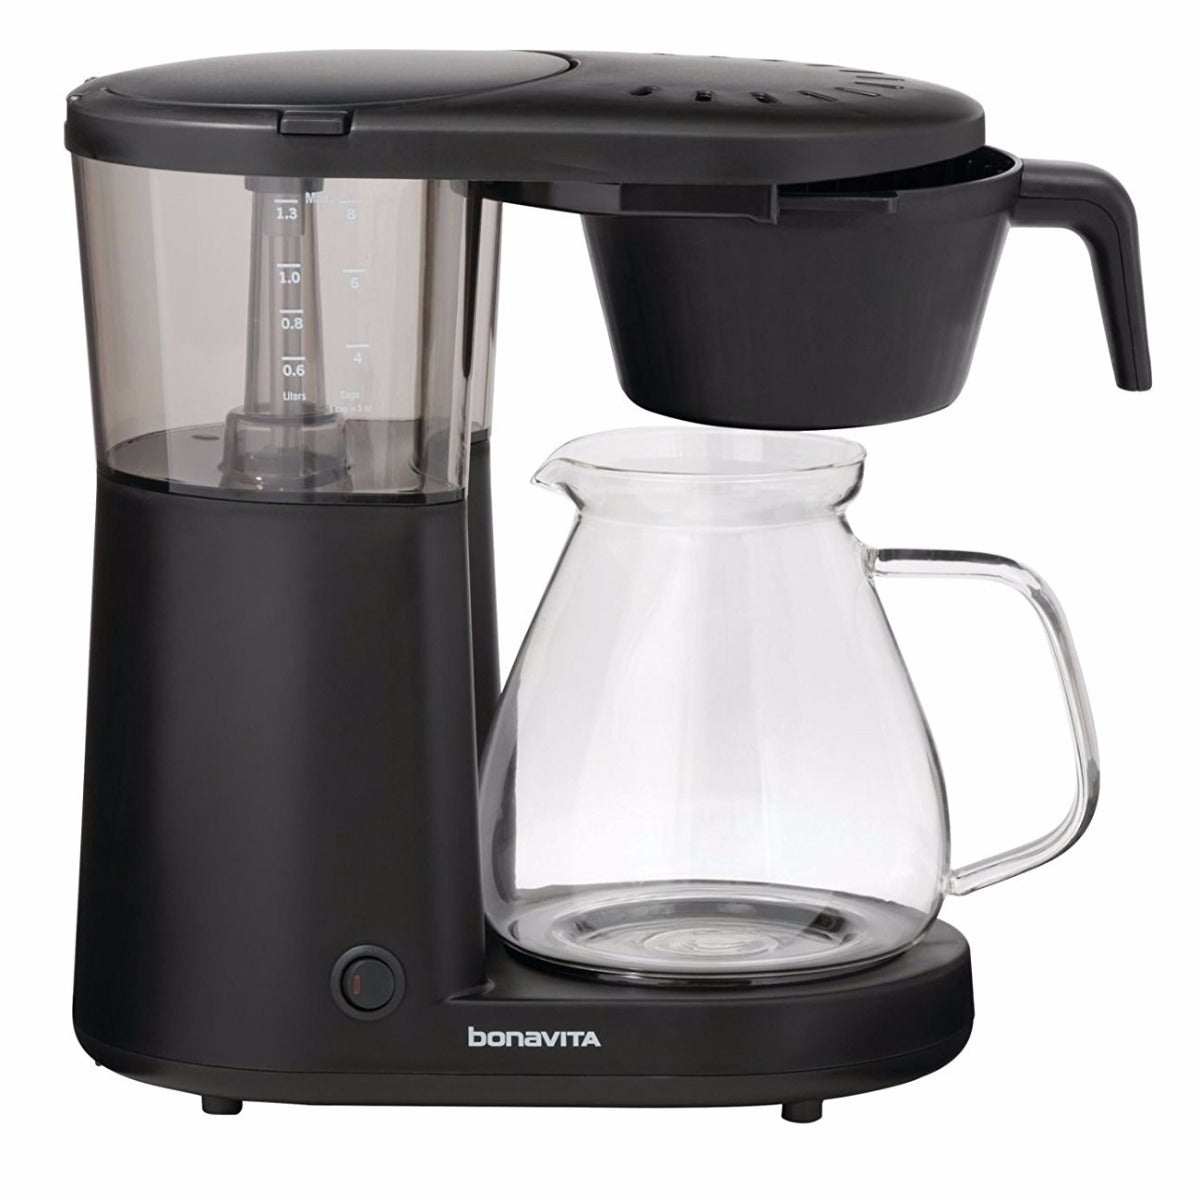 The best choice to stay at home - Bonavita 8 Cup One-Touch Coffee Maker -  Barista Warehouse Sales 2022